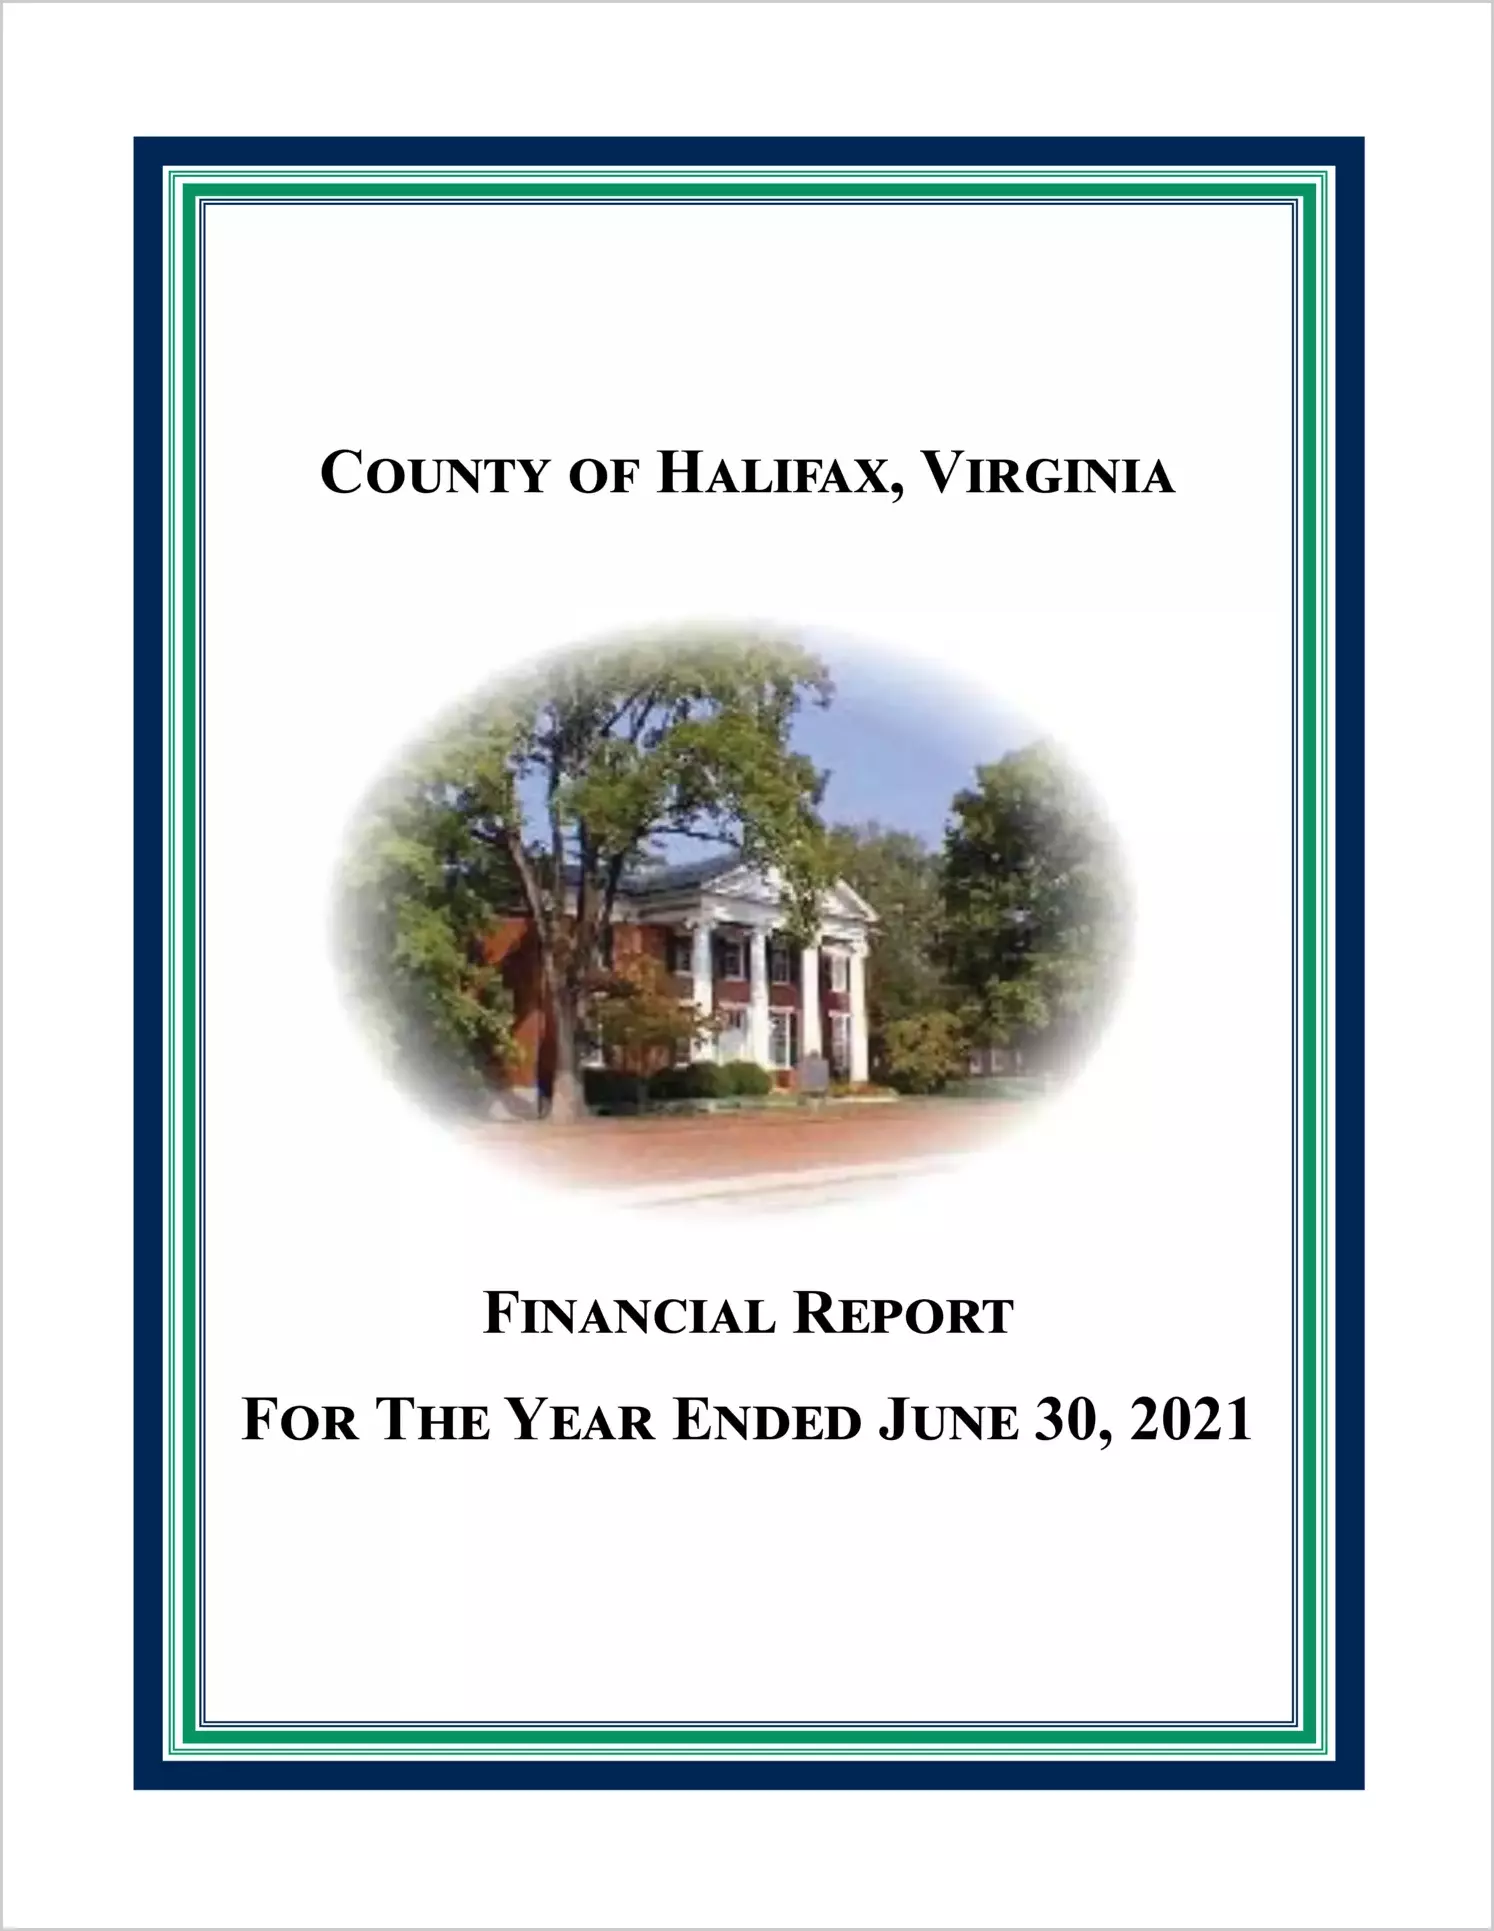 2021 Annual Financial Report for County of Halifax